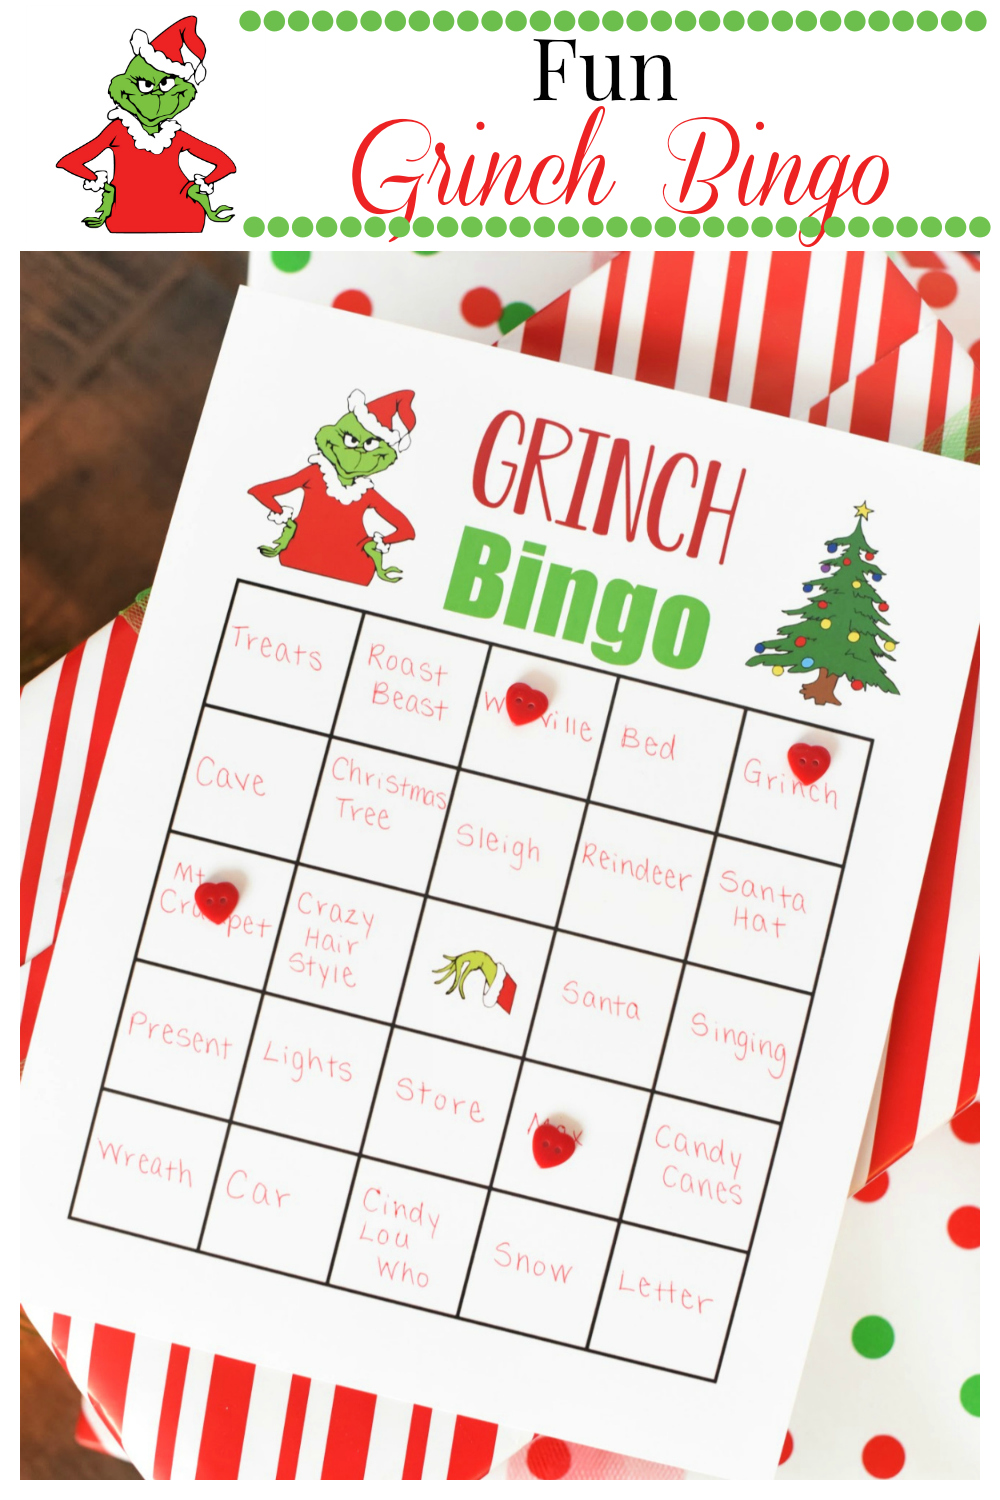 Grinch Bingo. This fun bingo game is perfect to play at your next Grinch Christmas party. Free Printable. #Grinchparty #Christmasparty #funpartygame #bingo #grinchbingo